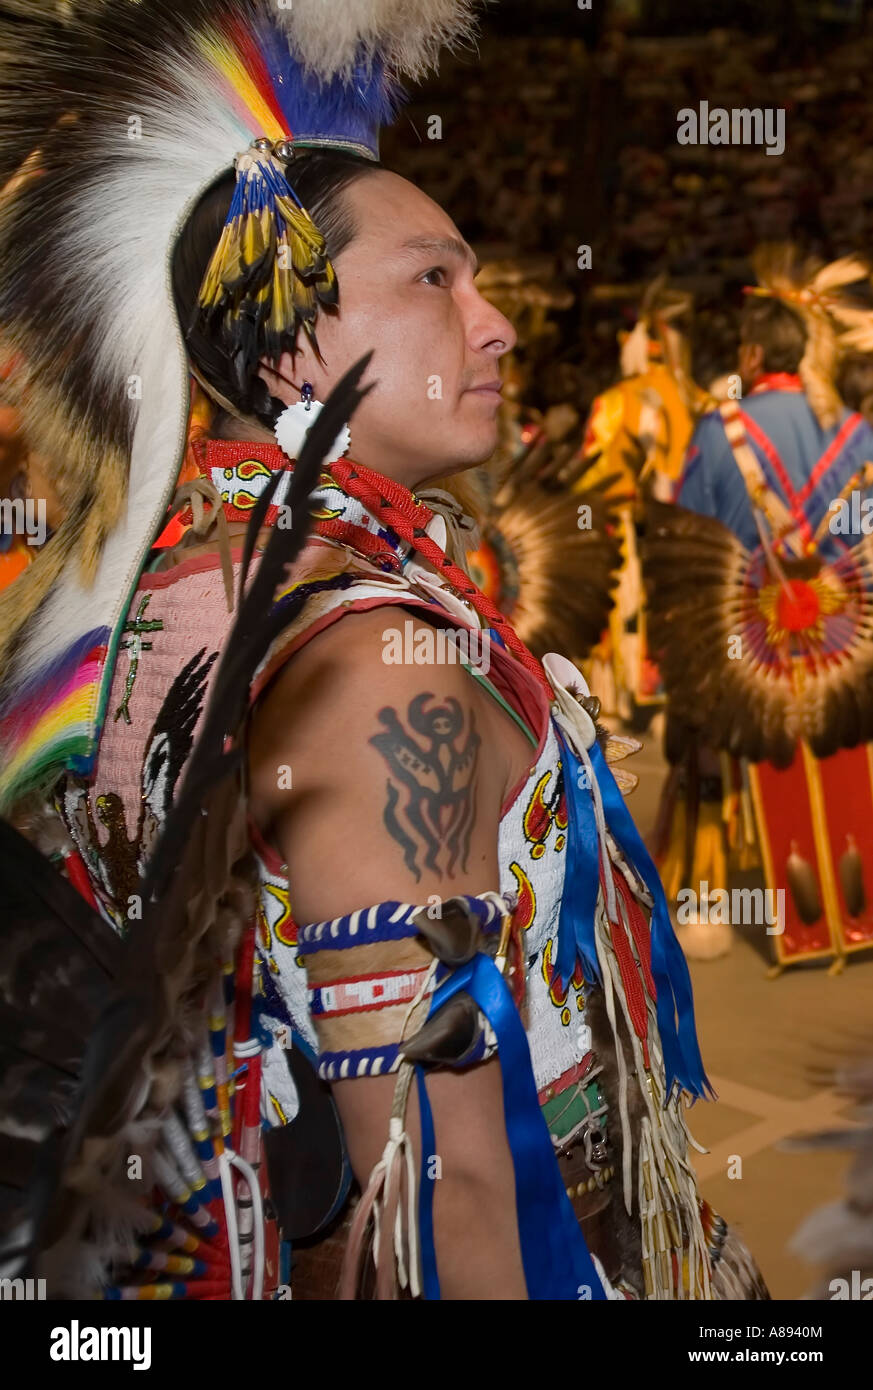 Participant in the annual Gathering of Nations powwow in Albuquerque